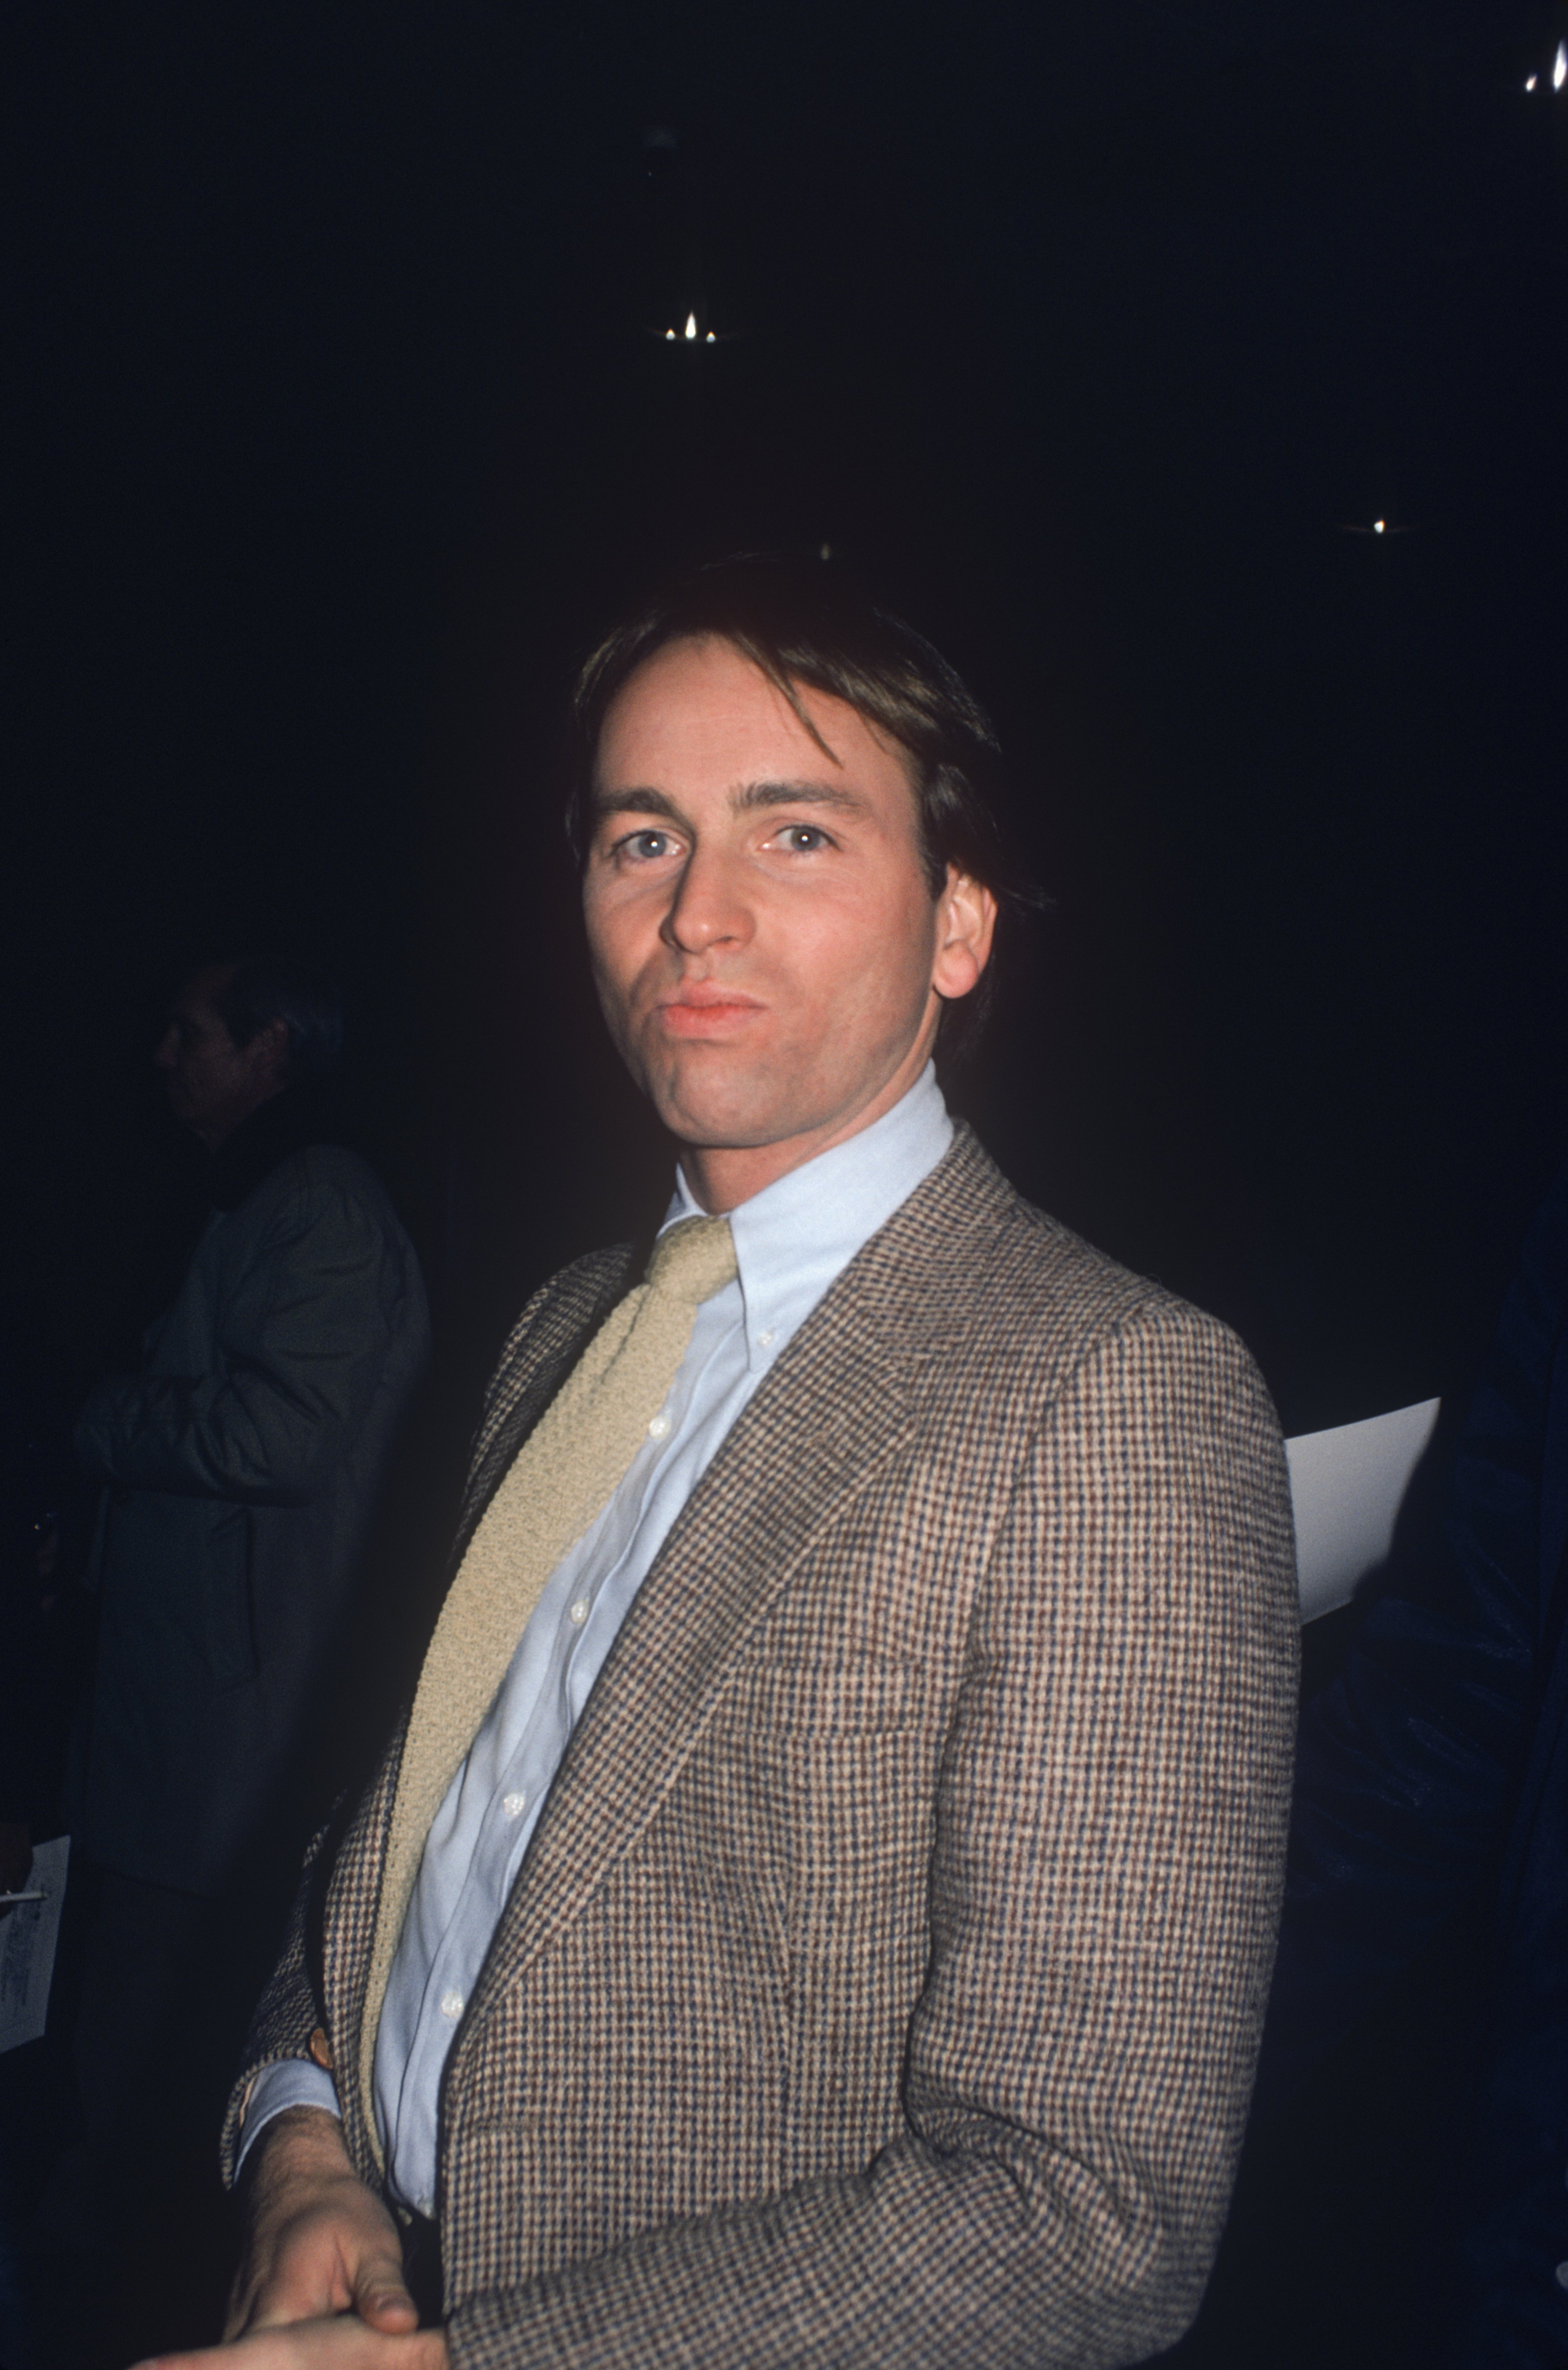 Actor John Ritter in New York, circa 1970. | Source: Getty Images